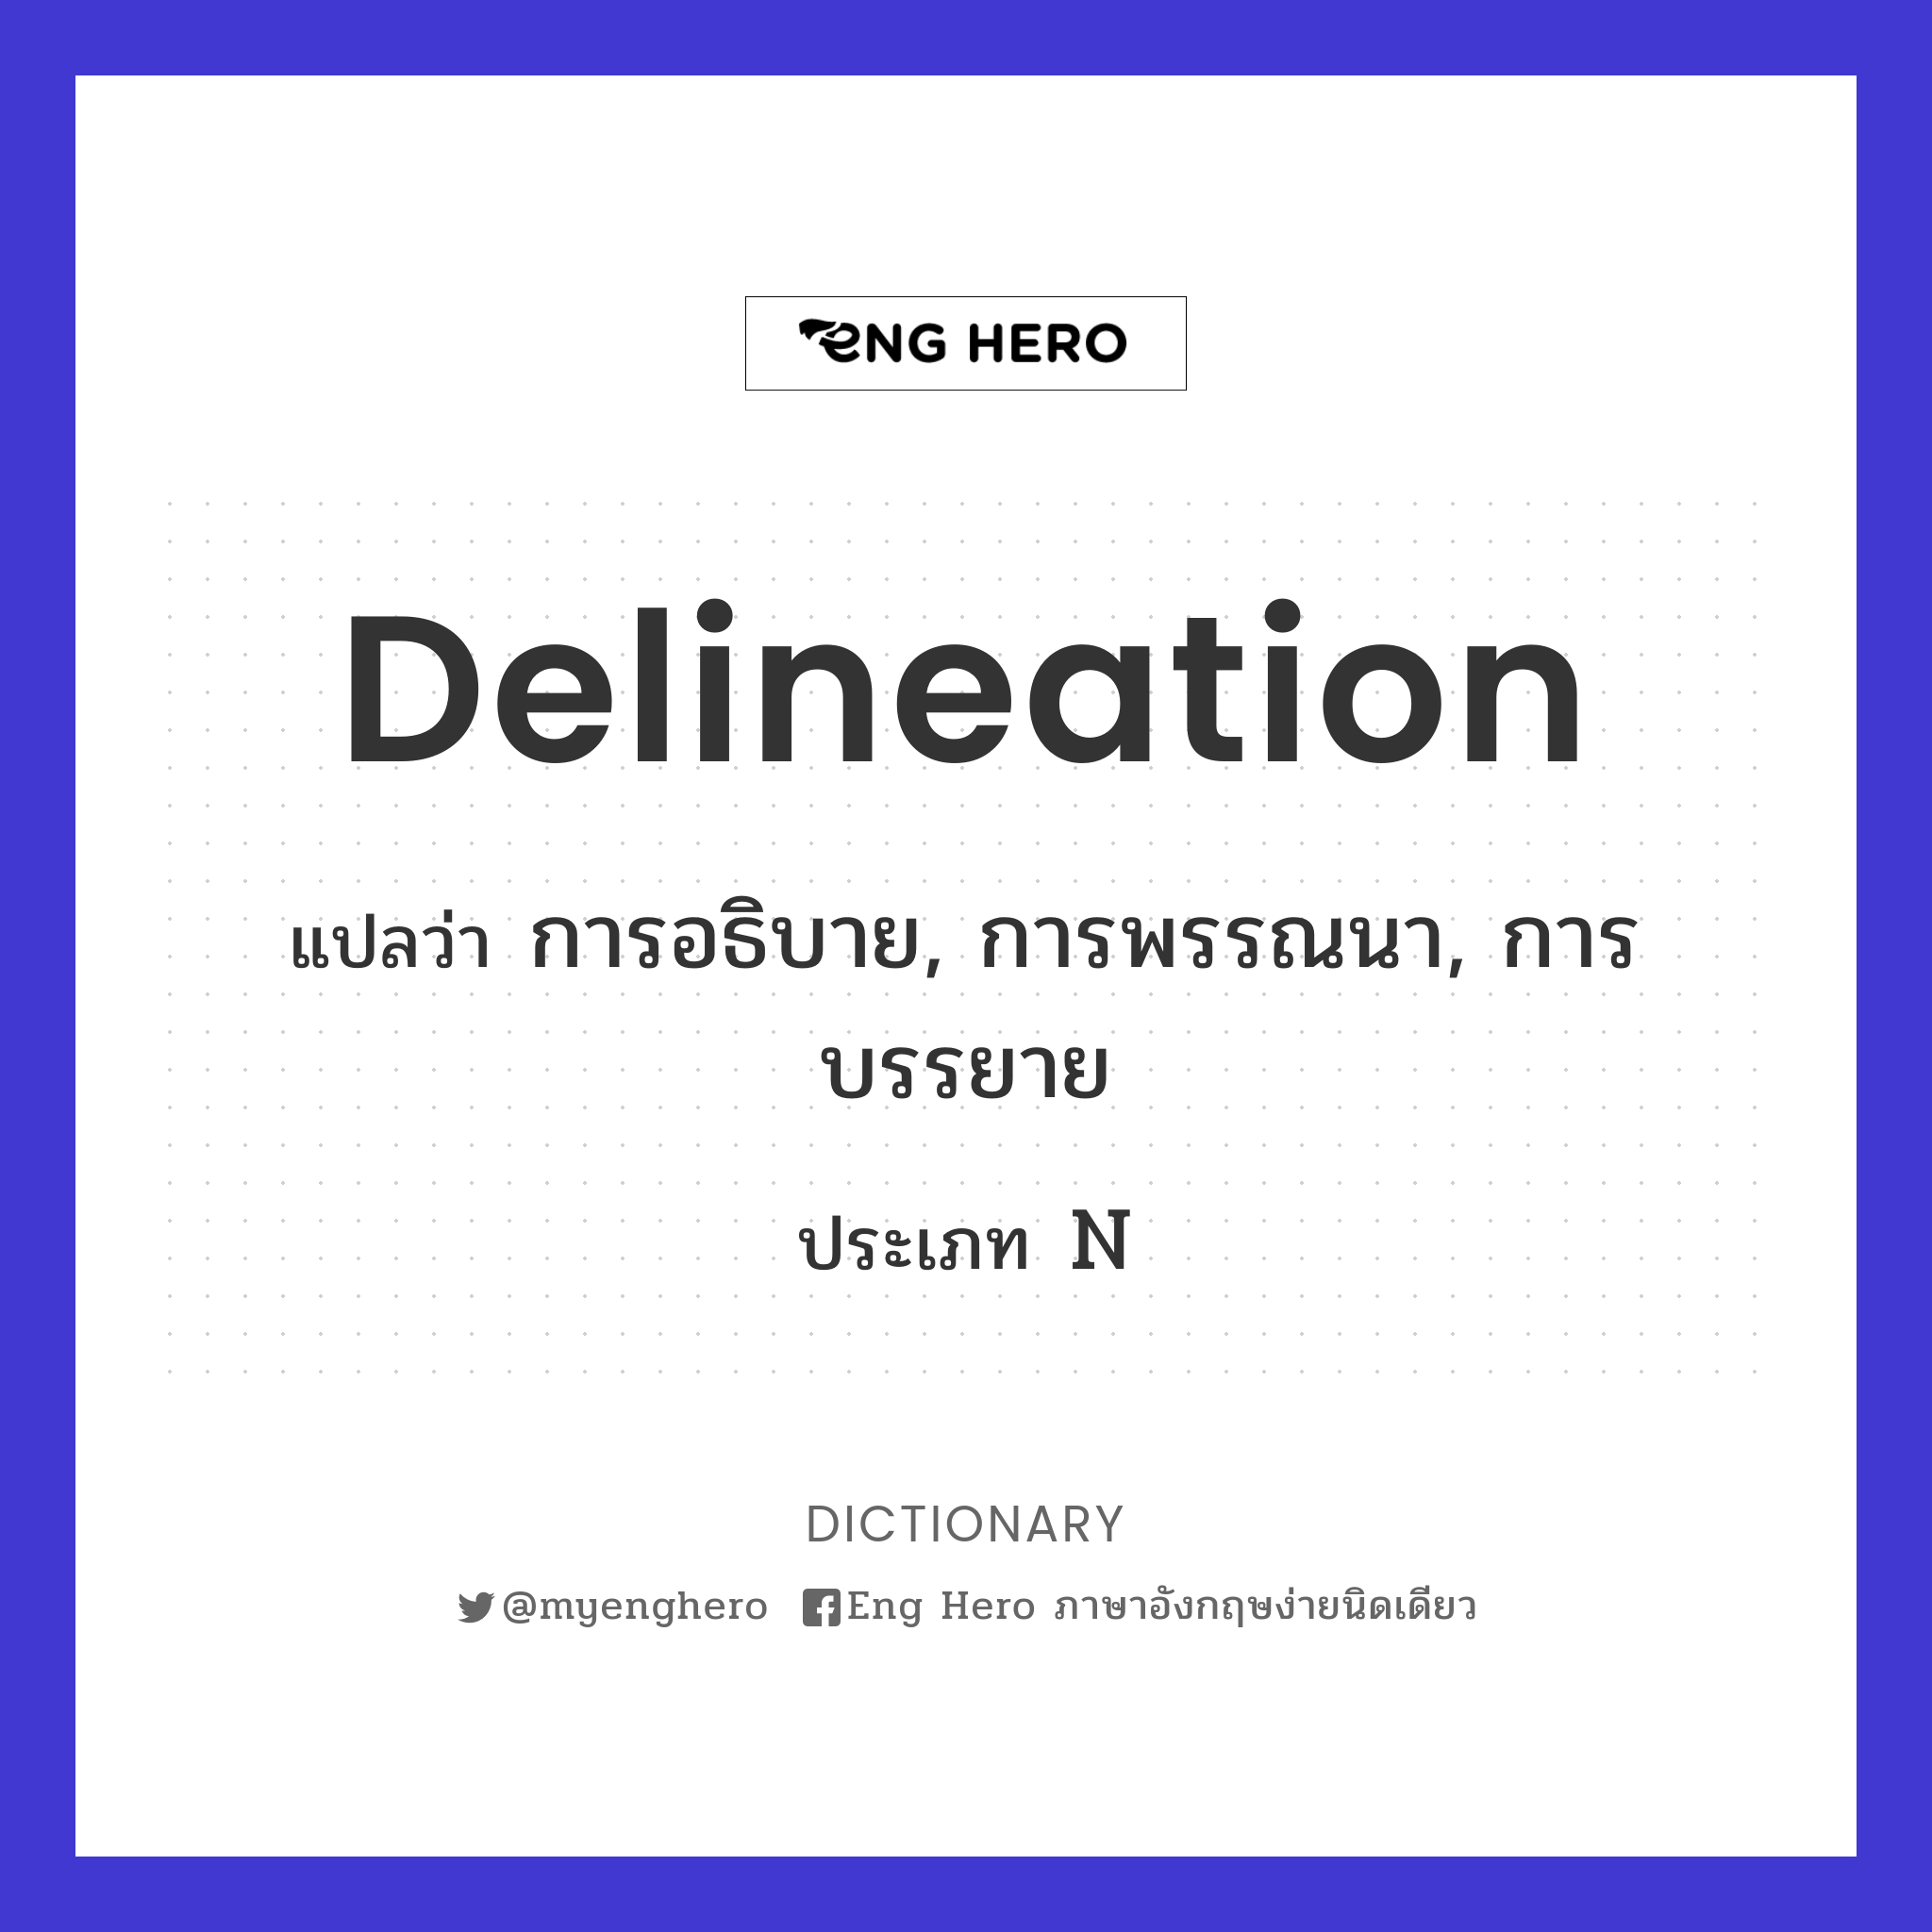 delineation